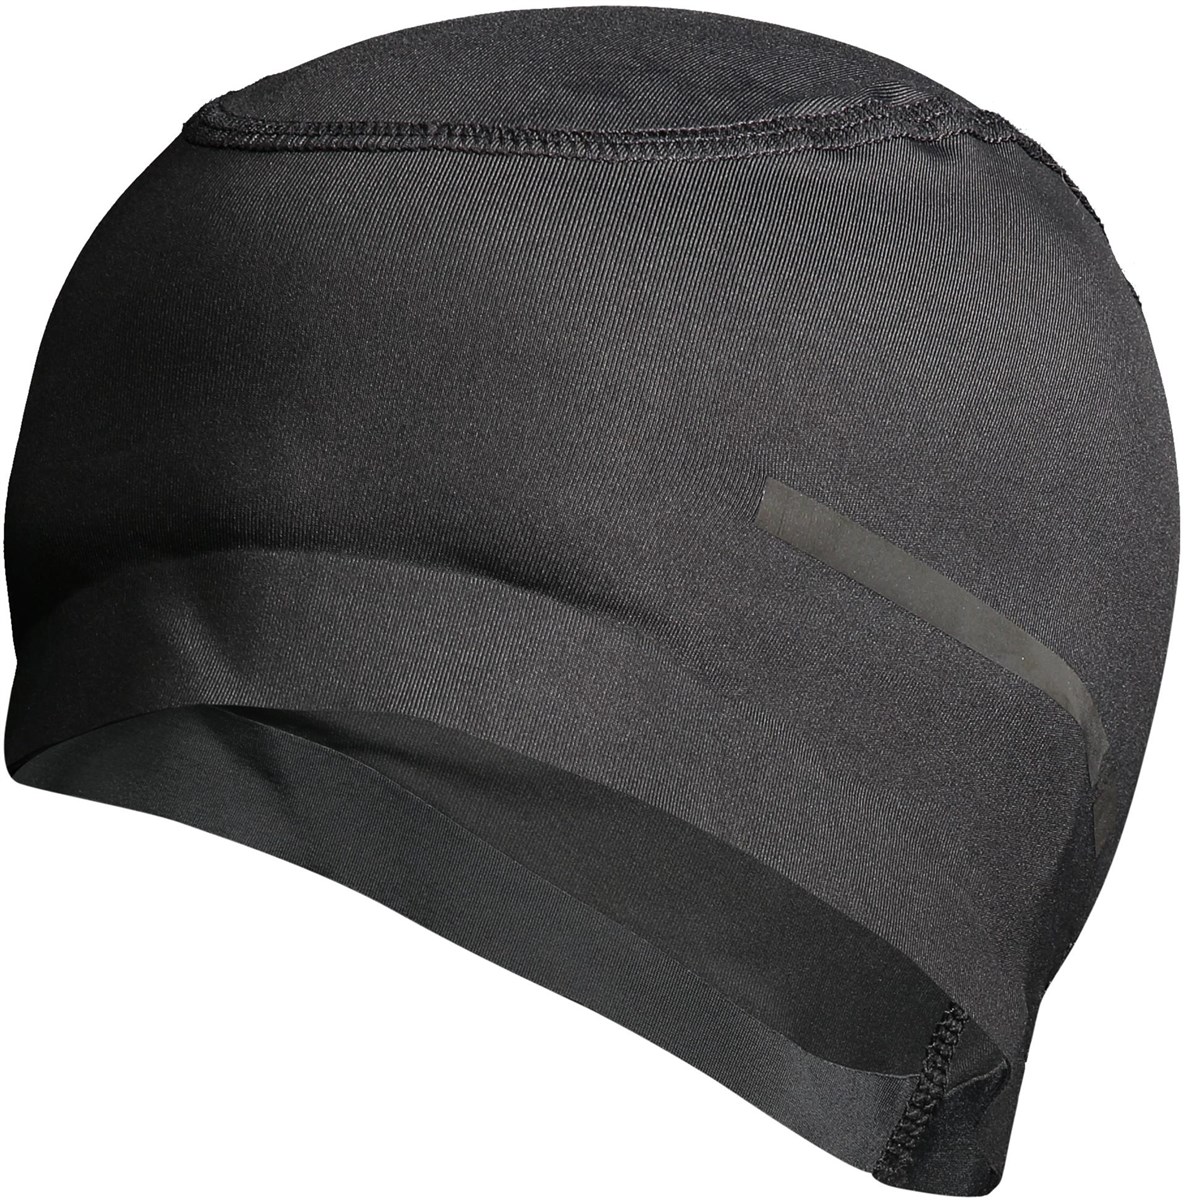 Scott AS 20 Beanie product image